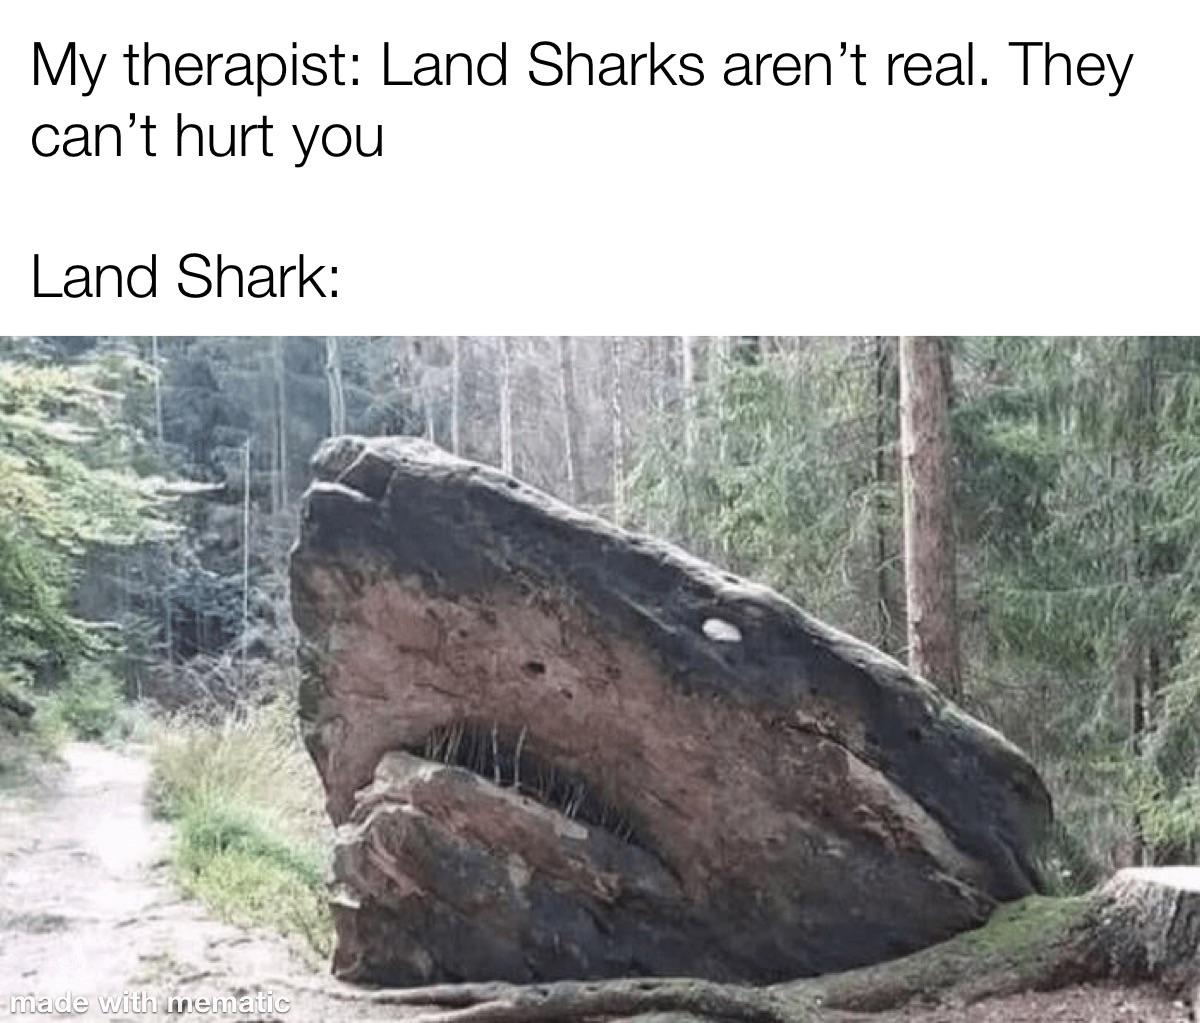 dank memes - outcrop - My therapist Land Sharks aren't real. They can't hurt you Land Shark made with mematic